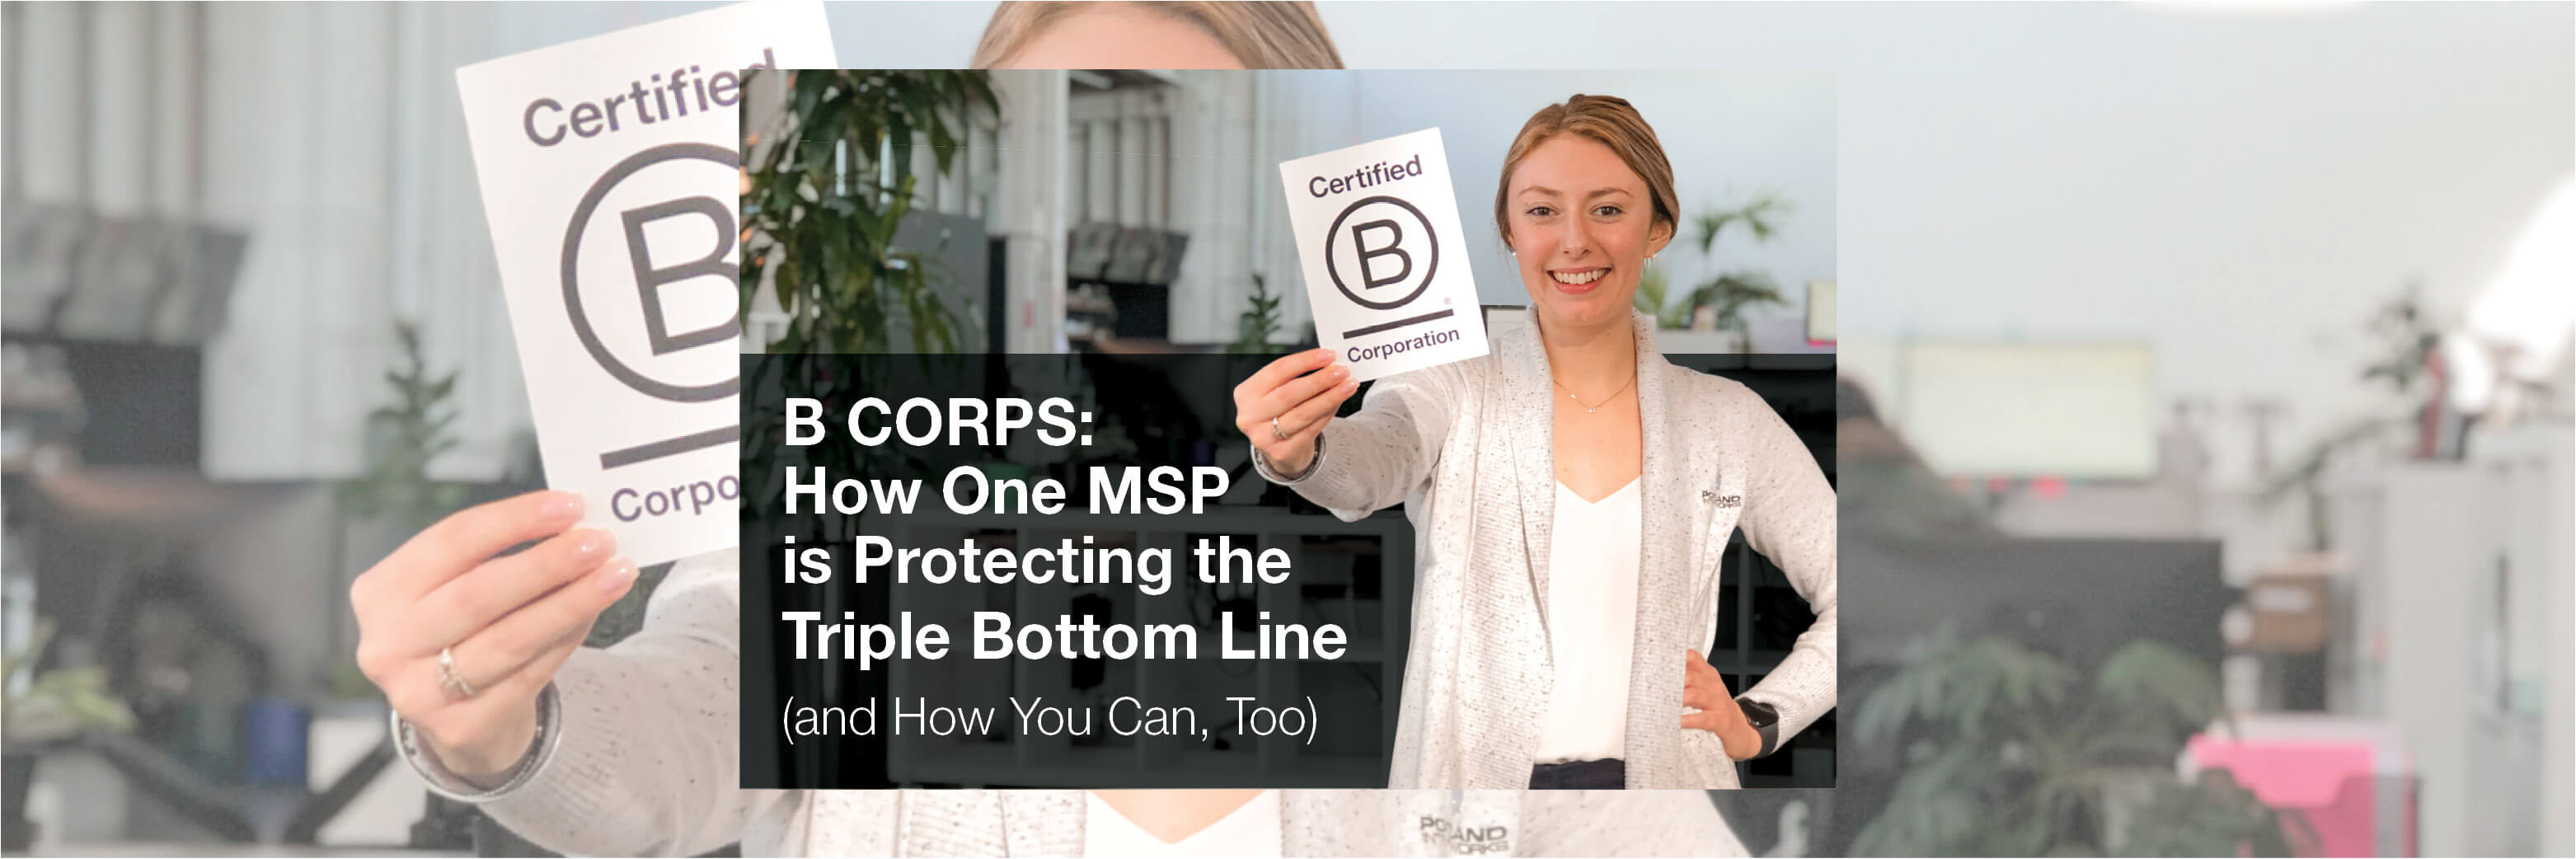 B Corps: How One MSP is Protecting the Triple Bottom Line (and How You Can, Too)